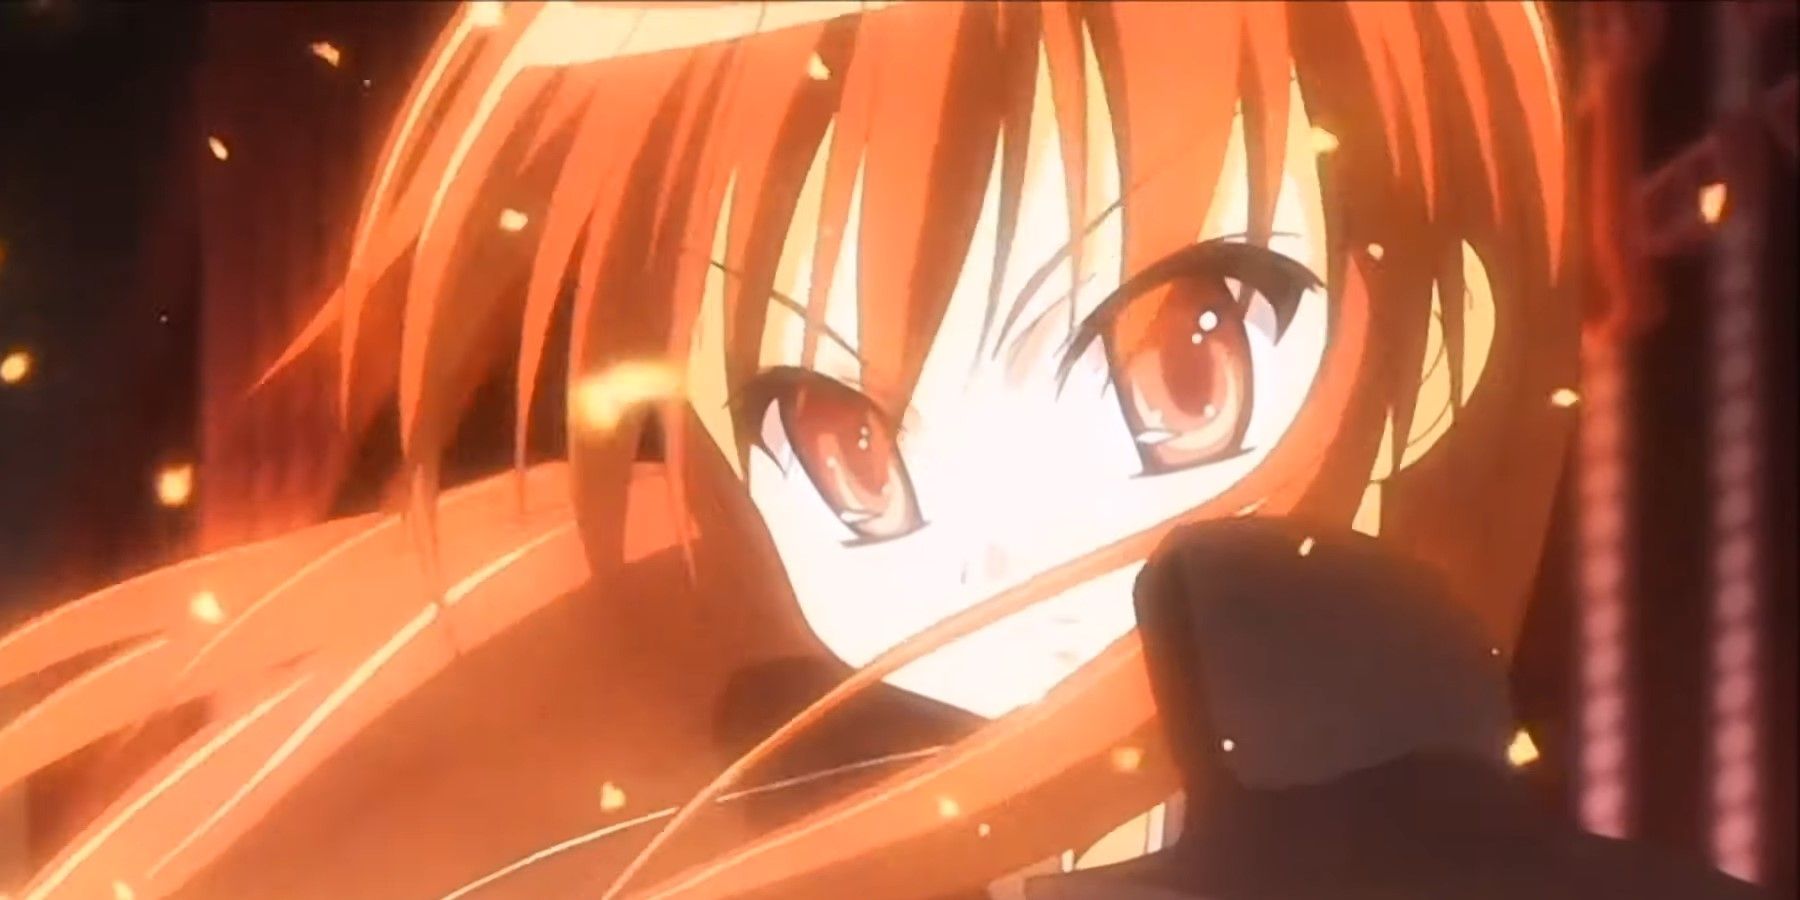 Shana in the midst of battle